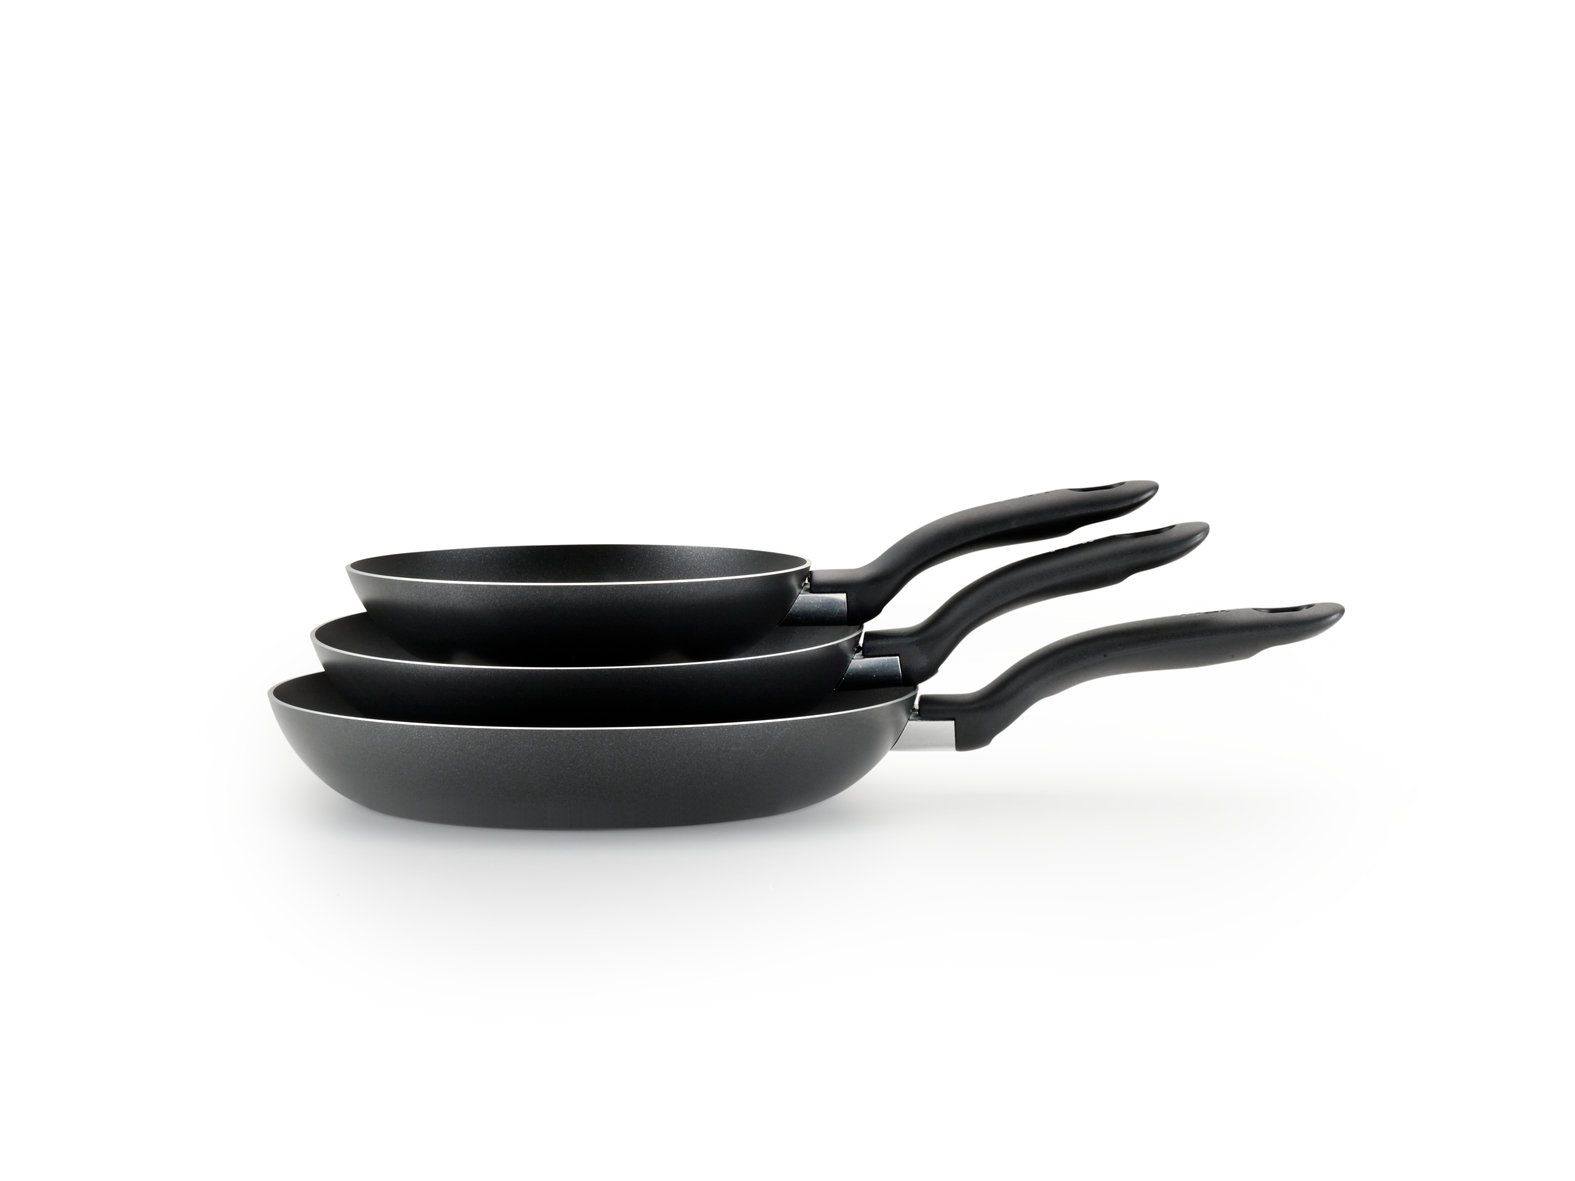 T-Fal Specialty Nonstick Everyday Pan with Lid - Black, 1 - Fry's